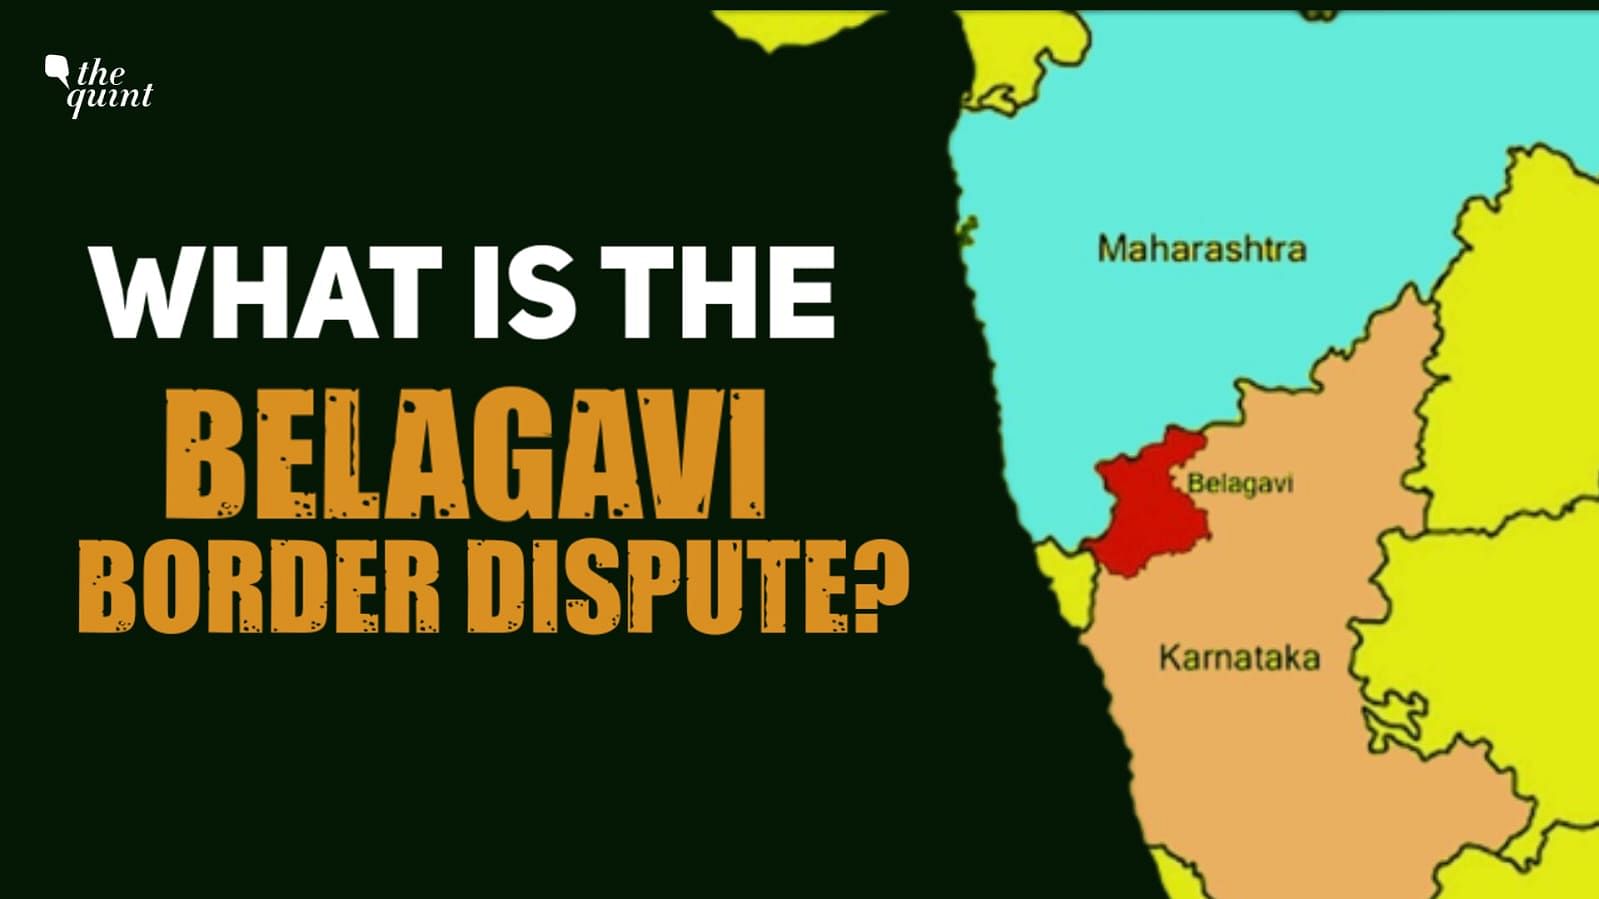 <div class="paragraphs"><p>The <a href="https://www.thequint.com/news/politics/politicians-once-again-flex-muscles-over-maharashtra-karnataka-border-issue">Maharashtra-Karnataka border dispute</a> is in the news, yet again. But why does it keep coming back in the news every couple of years? What is the border dispute all about?</p></div>